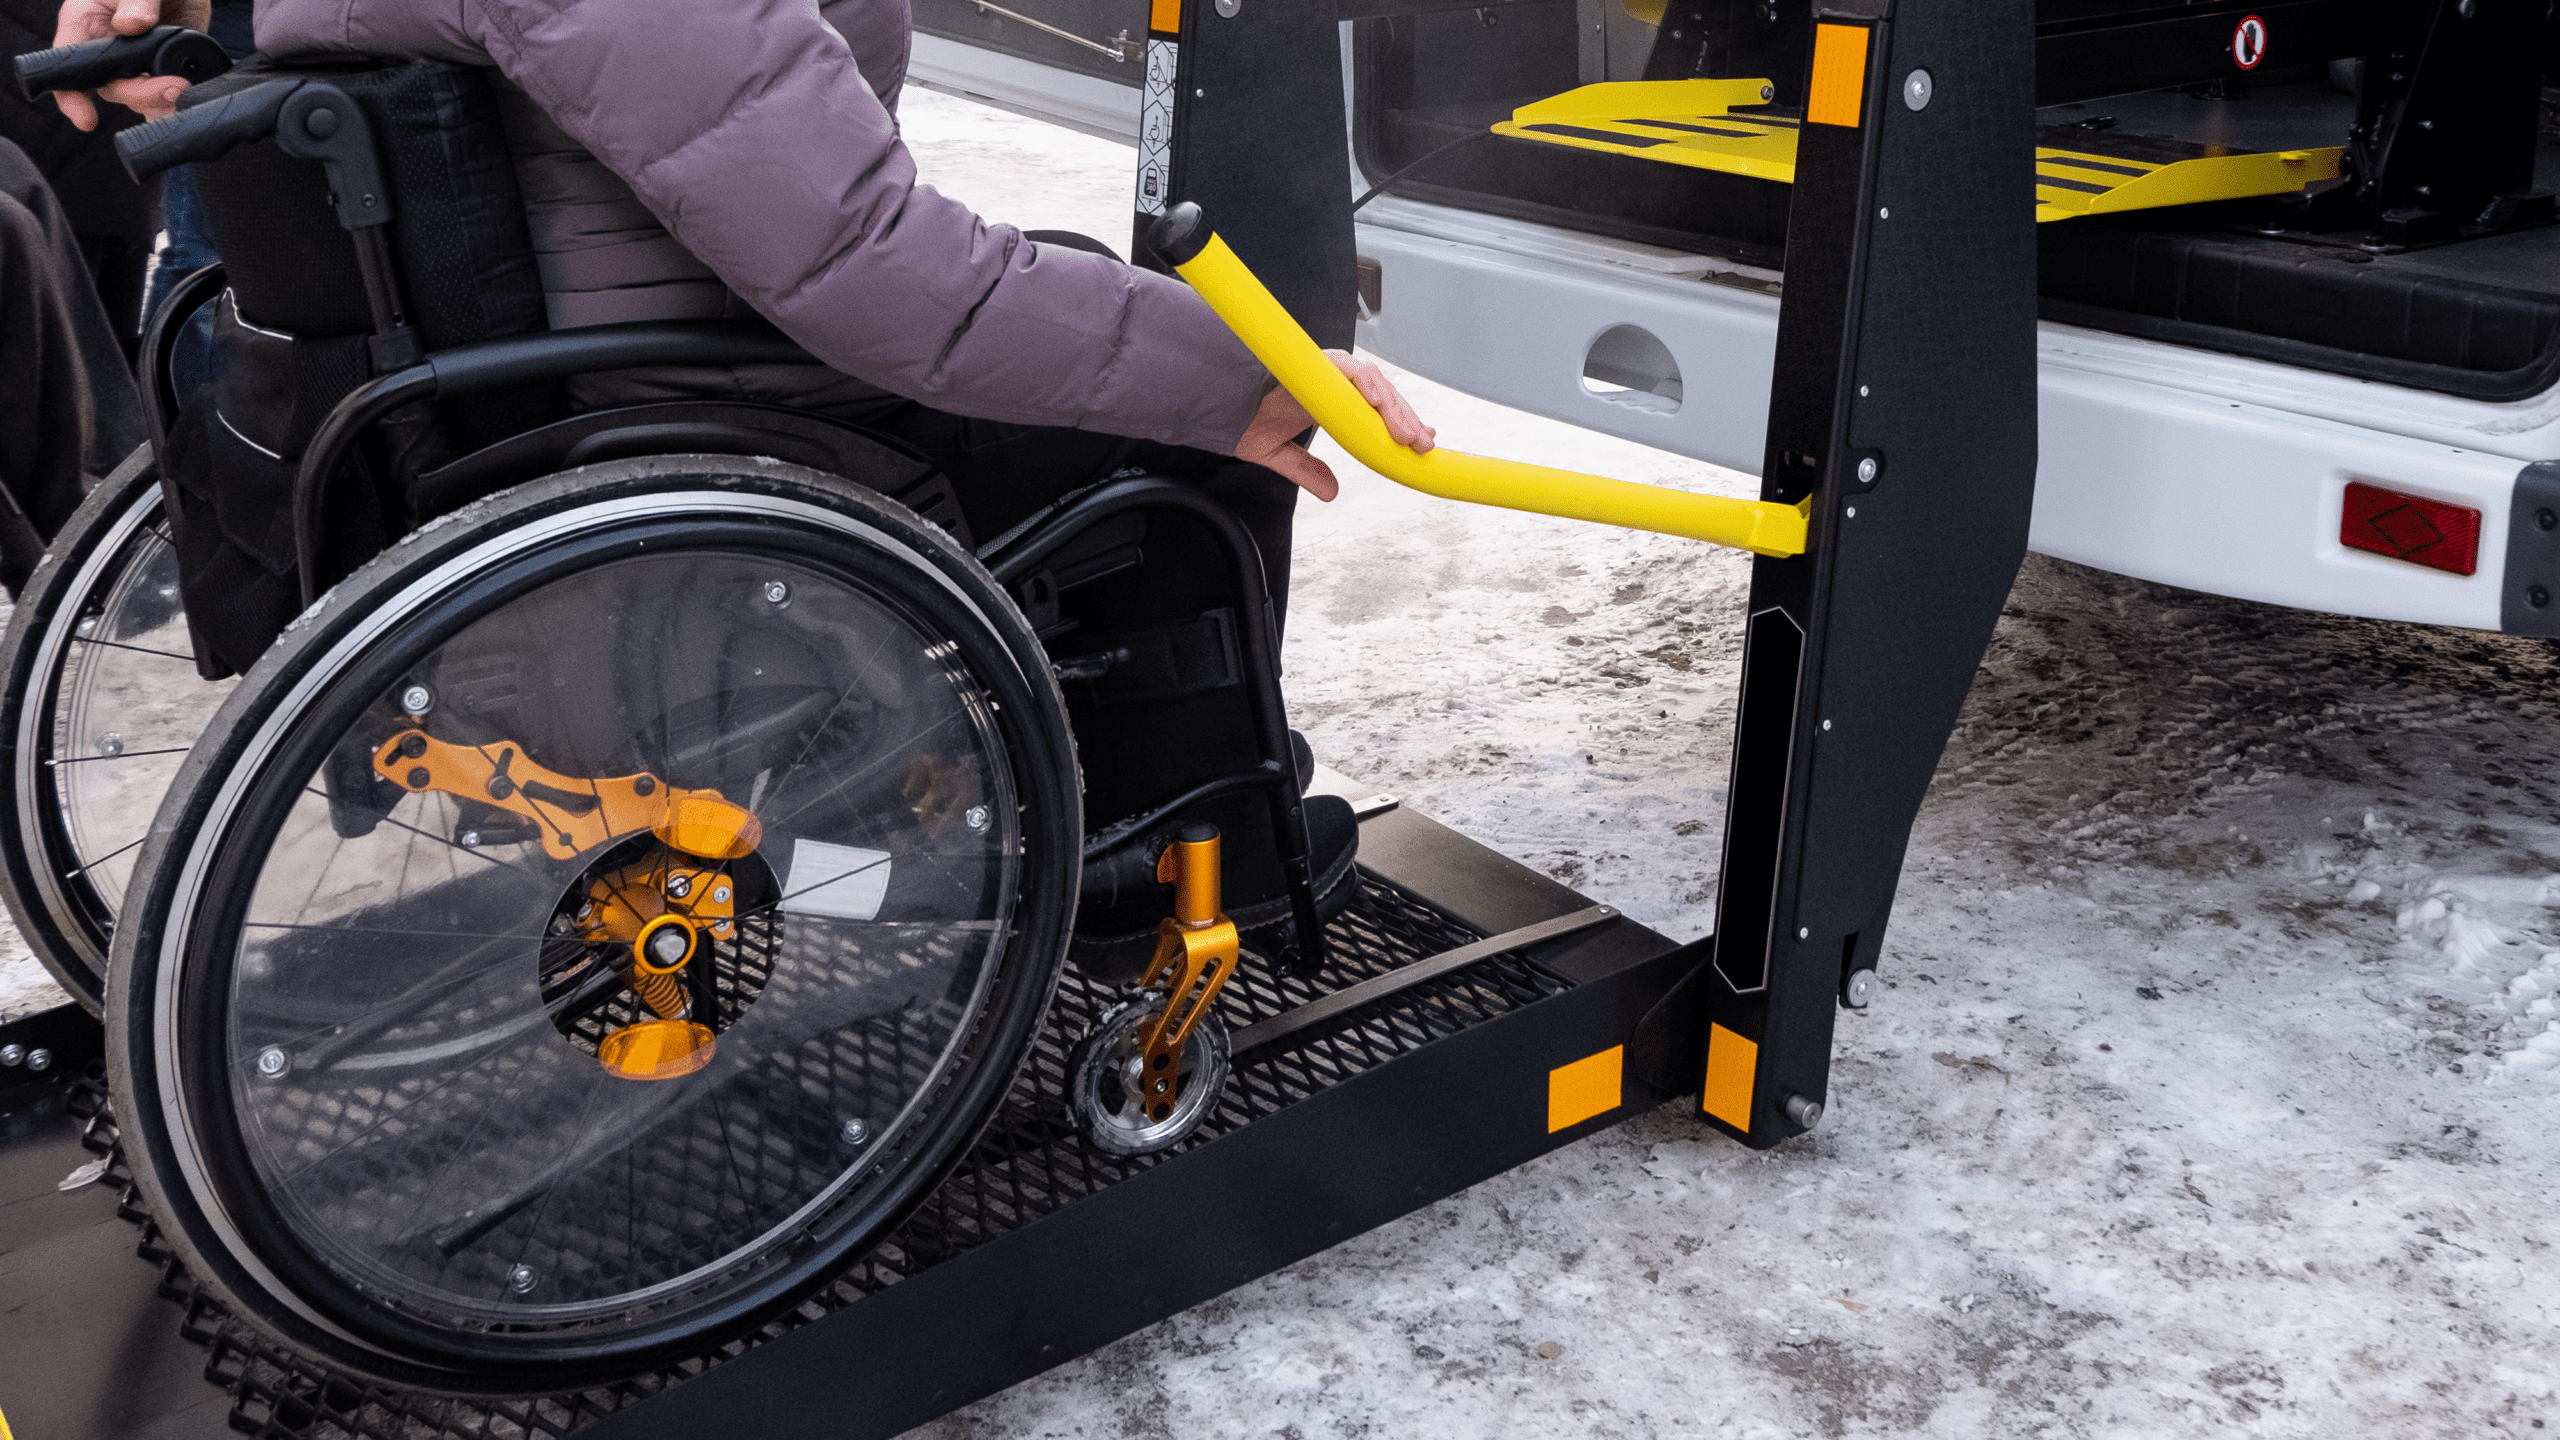 An accessible taxi van with a wheelchair lift is parked on a snowy residential street in winter. A man appears to be operating the mechanical wheelchair lift, which is lowered to pavement level. The lift is black metal and has a bright yellow handrail. On the lift is a woman in a wheelchair, bundled up in a coat. She waits as the man assists her into the specialized disability transportation vehicle.